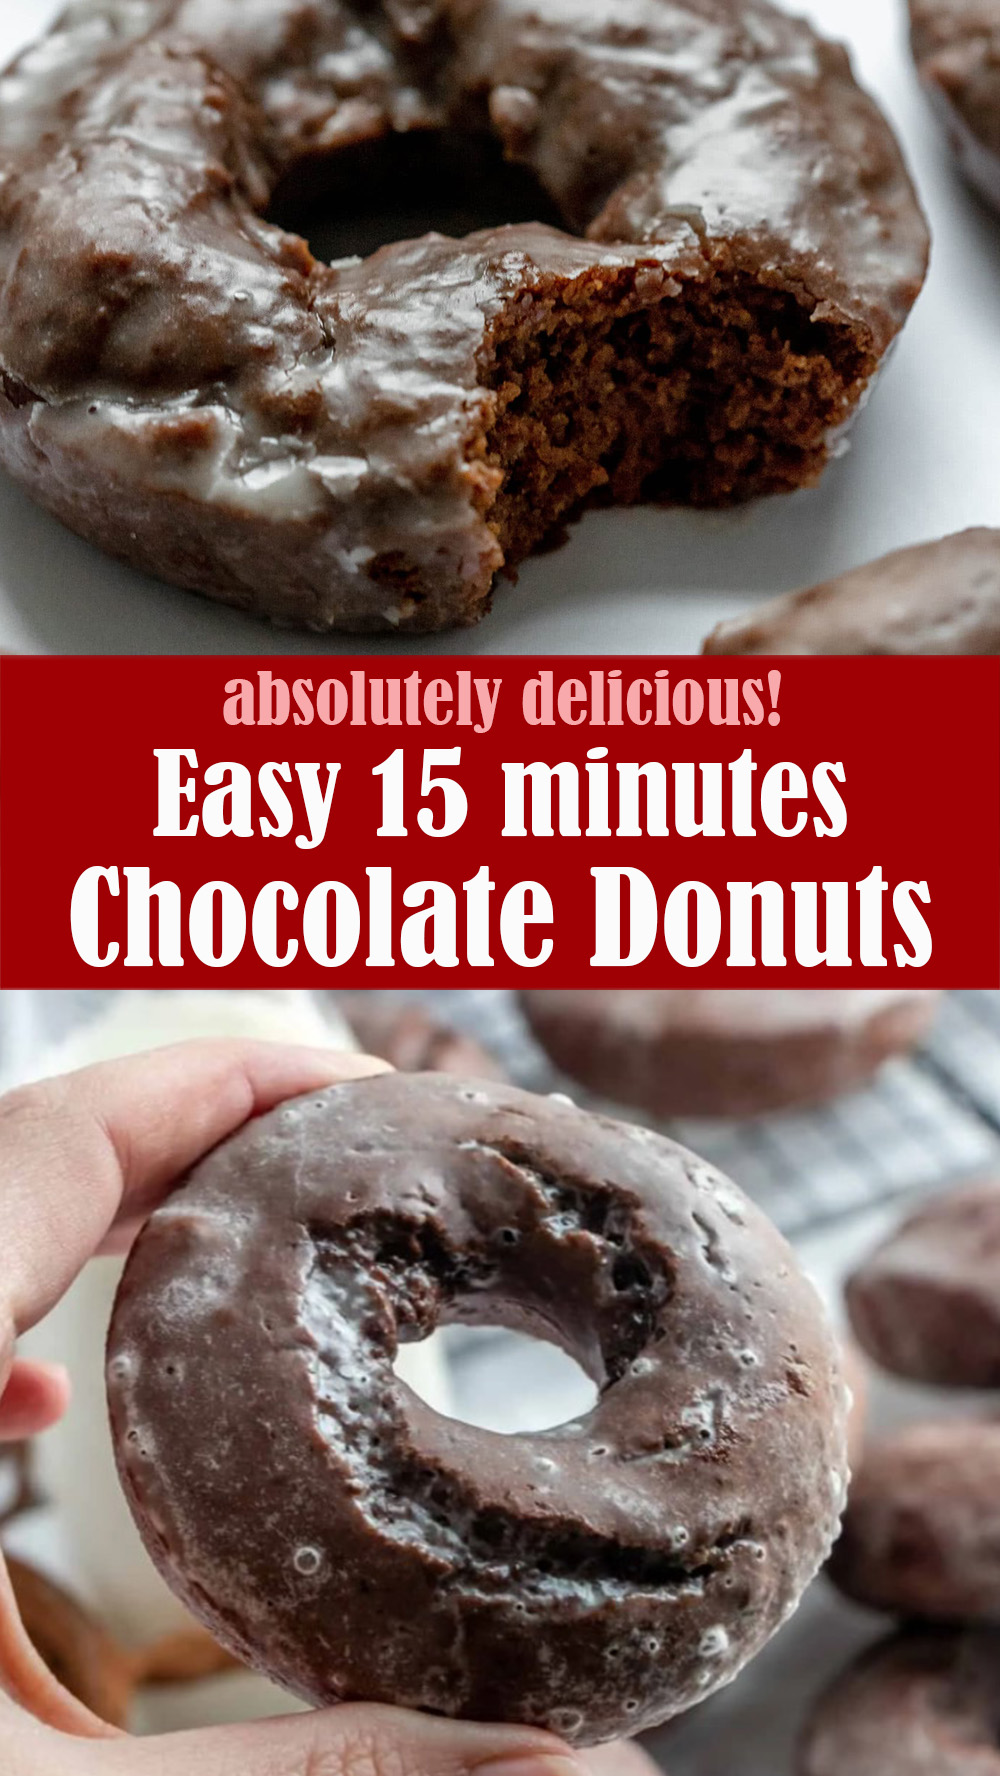 Easy 15 minutes Chocolate Donuts